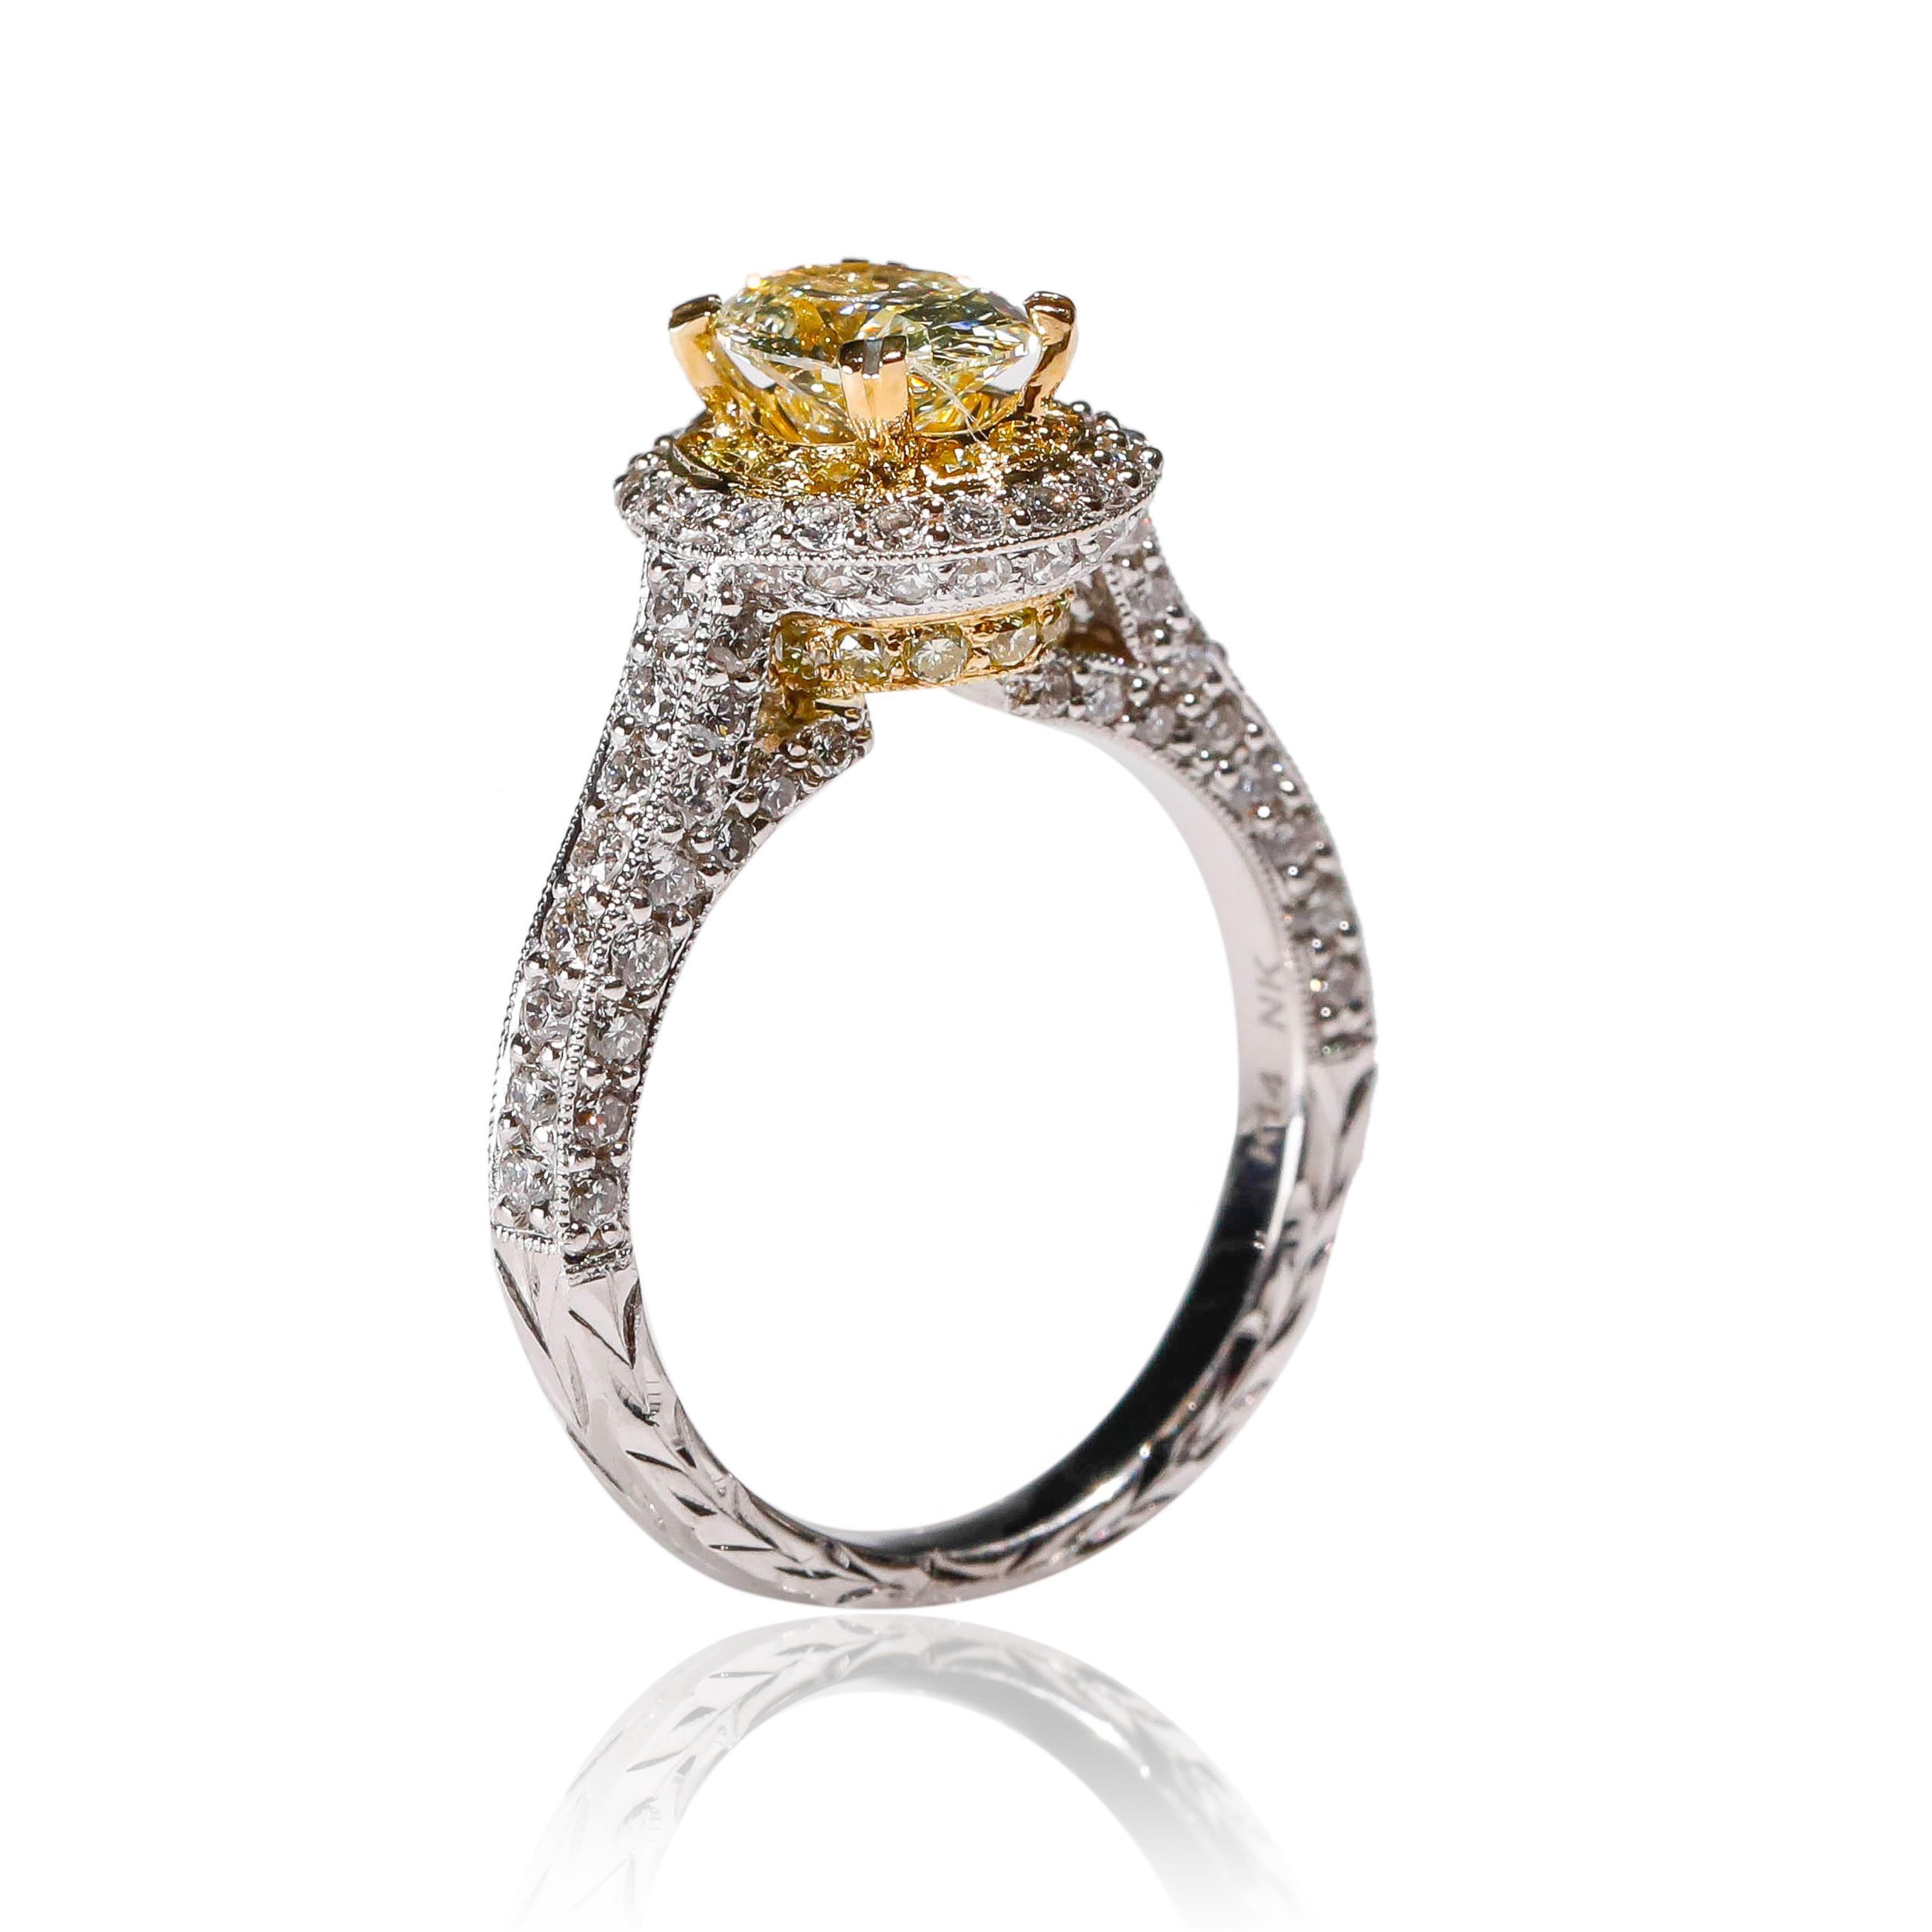 14 Karat White Gold Yellow Diamond Halo Engagement Ring Designed by Natalie K

Crafted in 14 kt White Gold, this Unique design showcases a Yellow Diamond 1.03 TCW oval-shaped diamond, set in a halo of oval mesmerizing diamonds, Polished to a